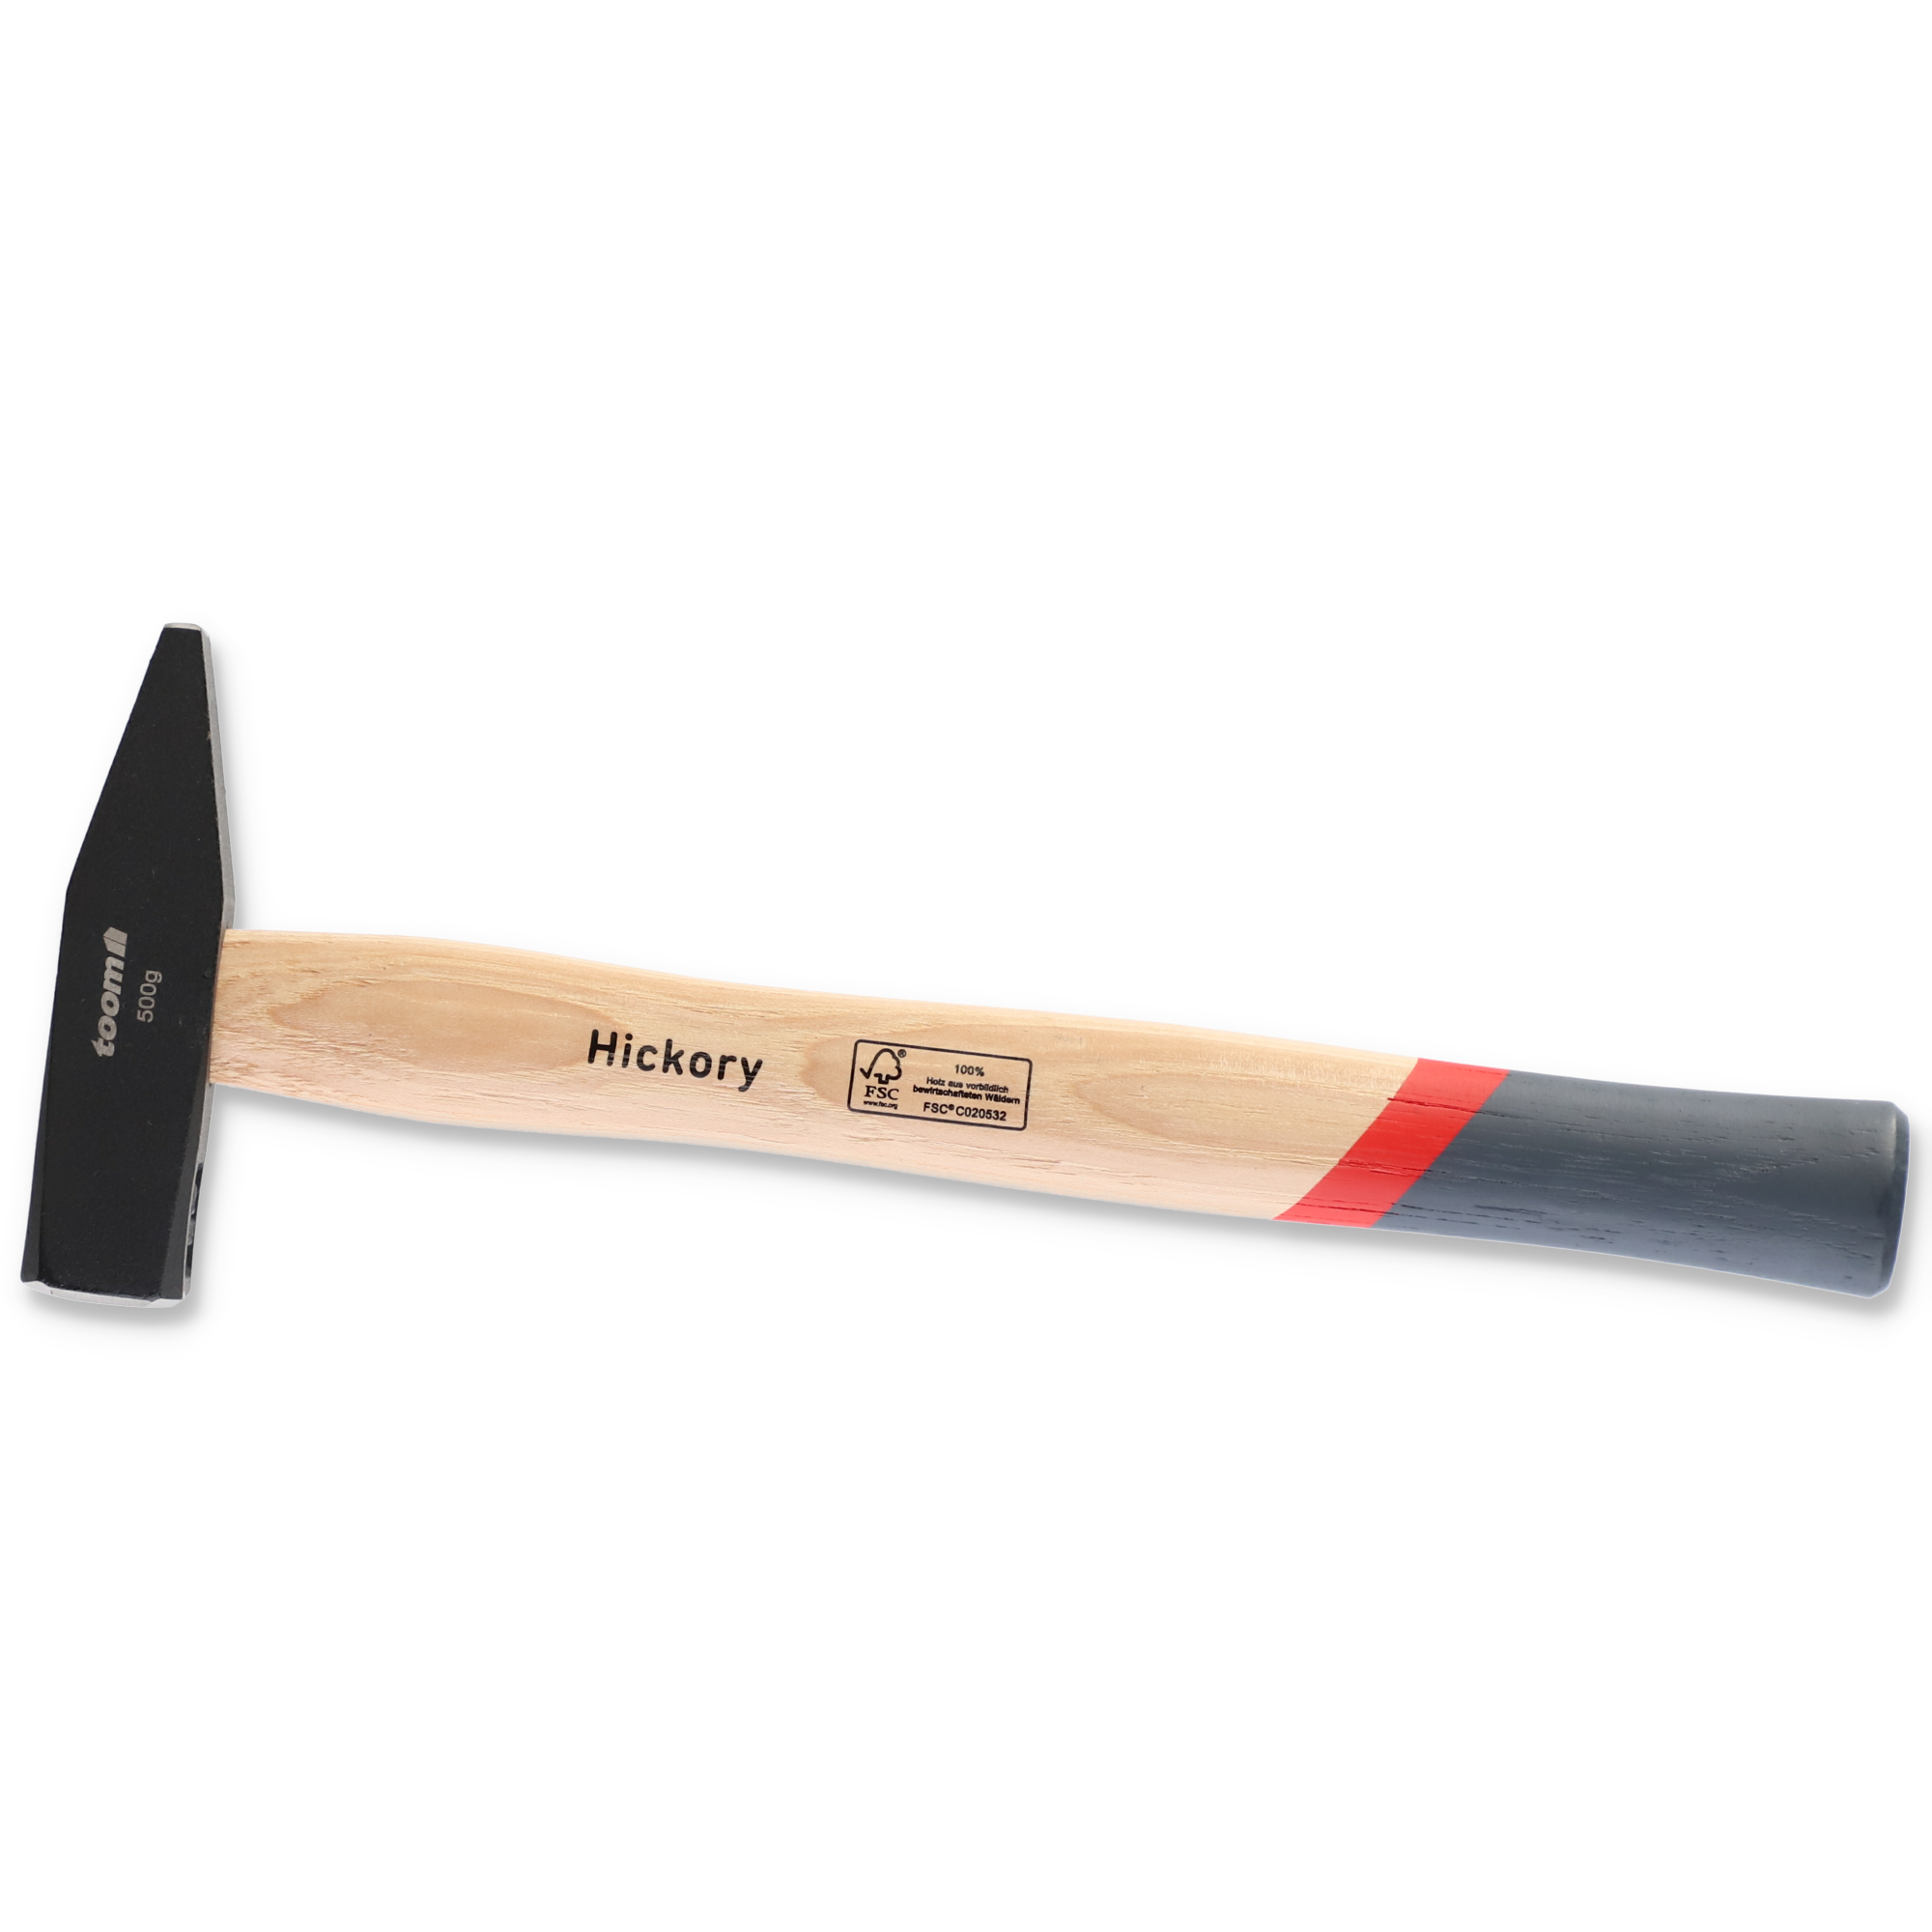 Schlosserhammer Hickory 500 g + product picture